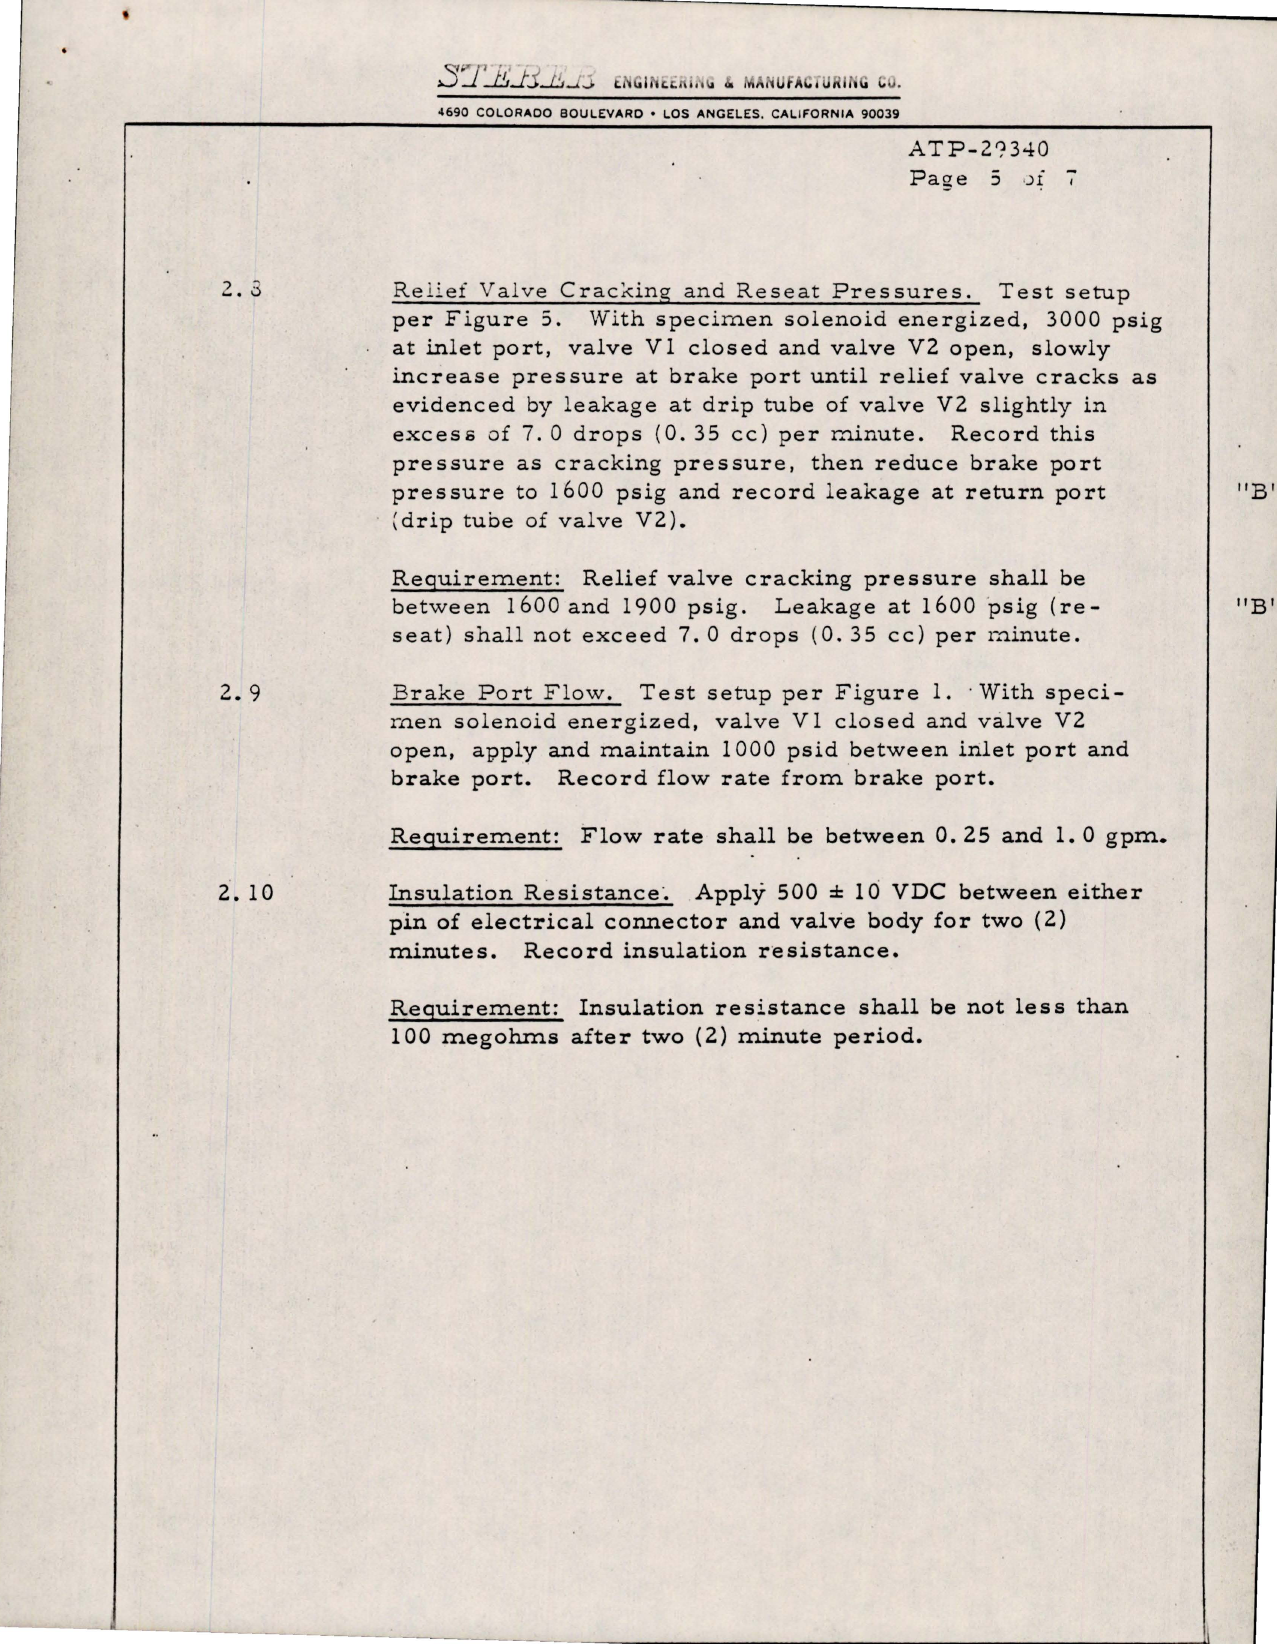 Sample page 5 from AirCorps Library document: Acceptance Test Procedure for Valve Prop Brake Control 